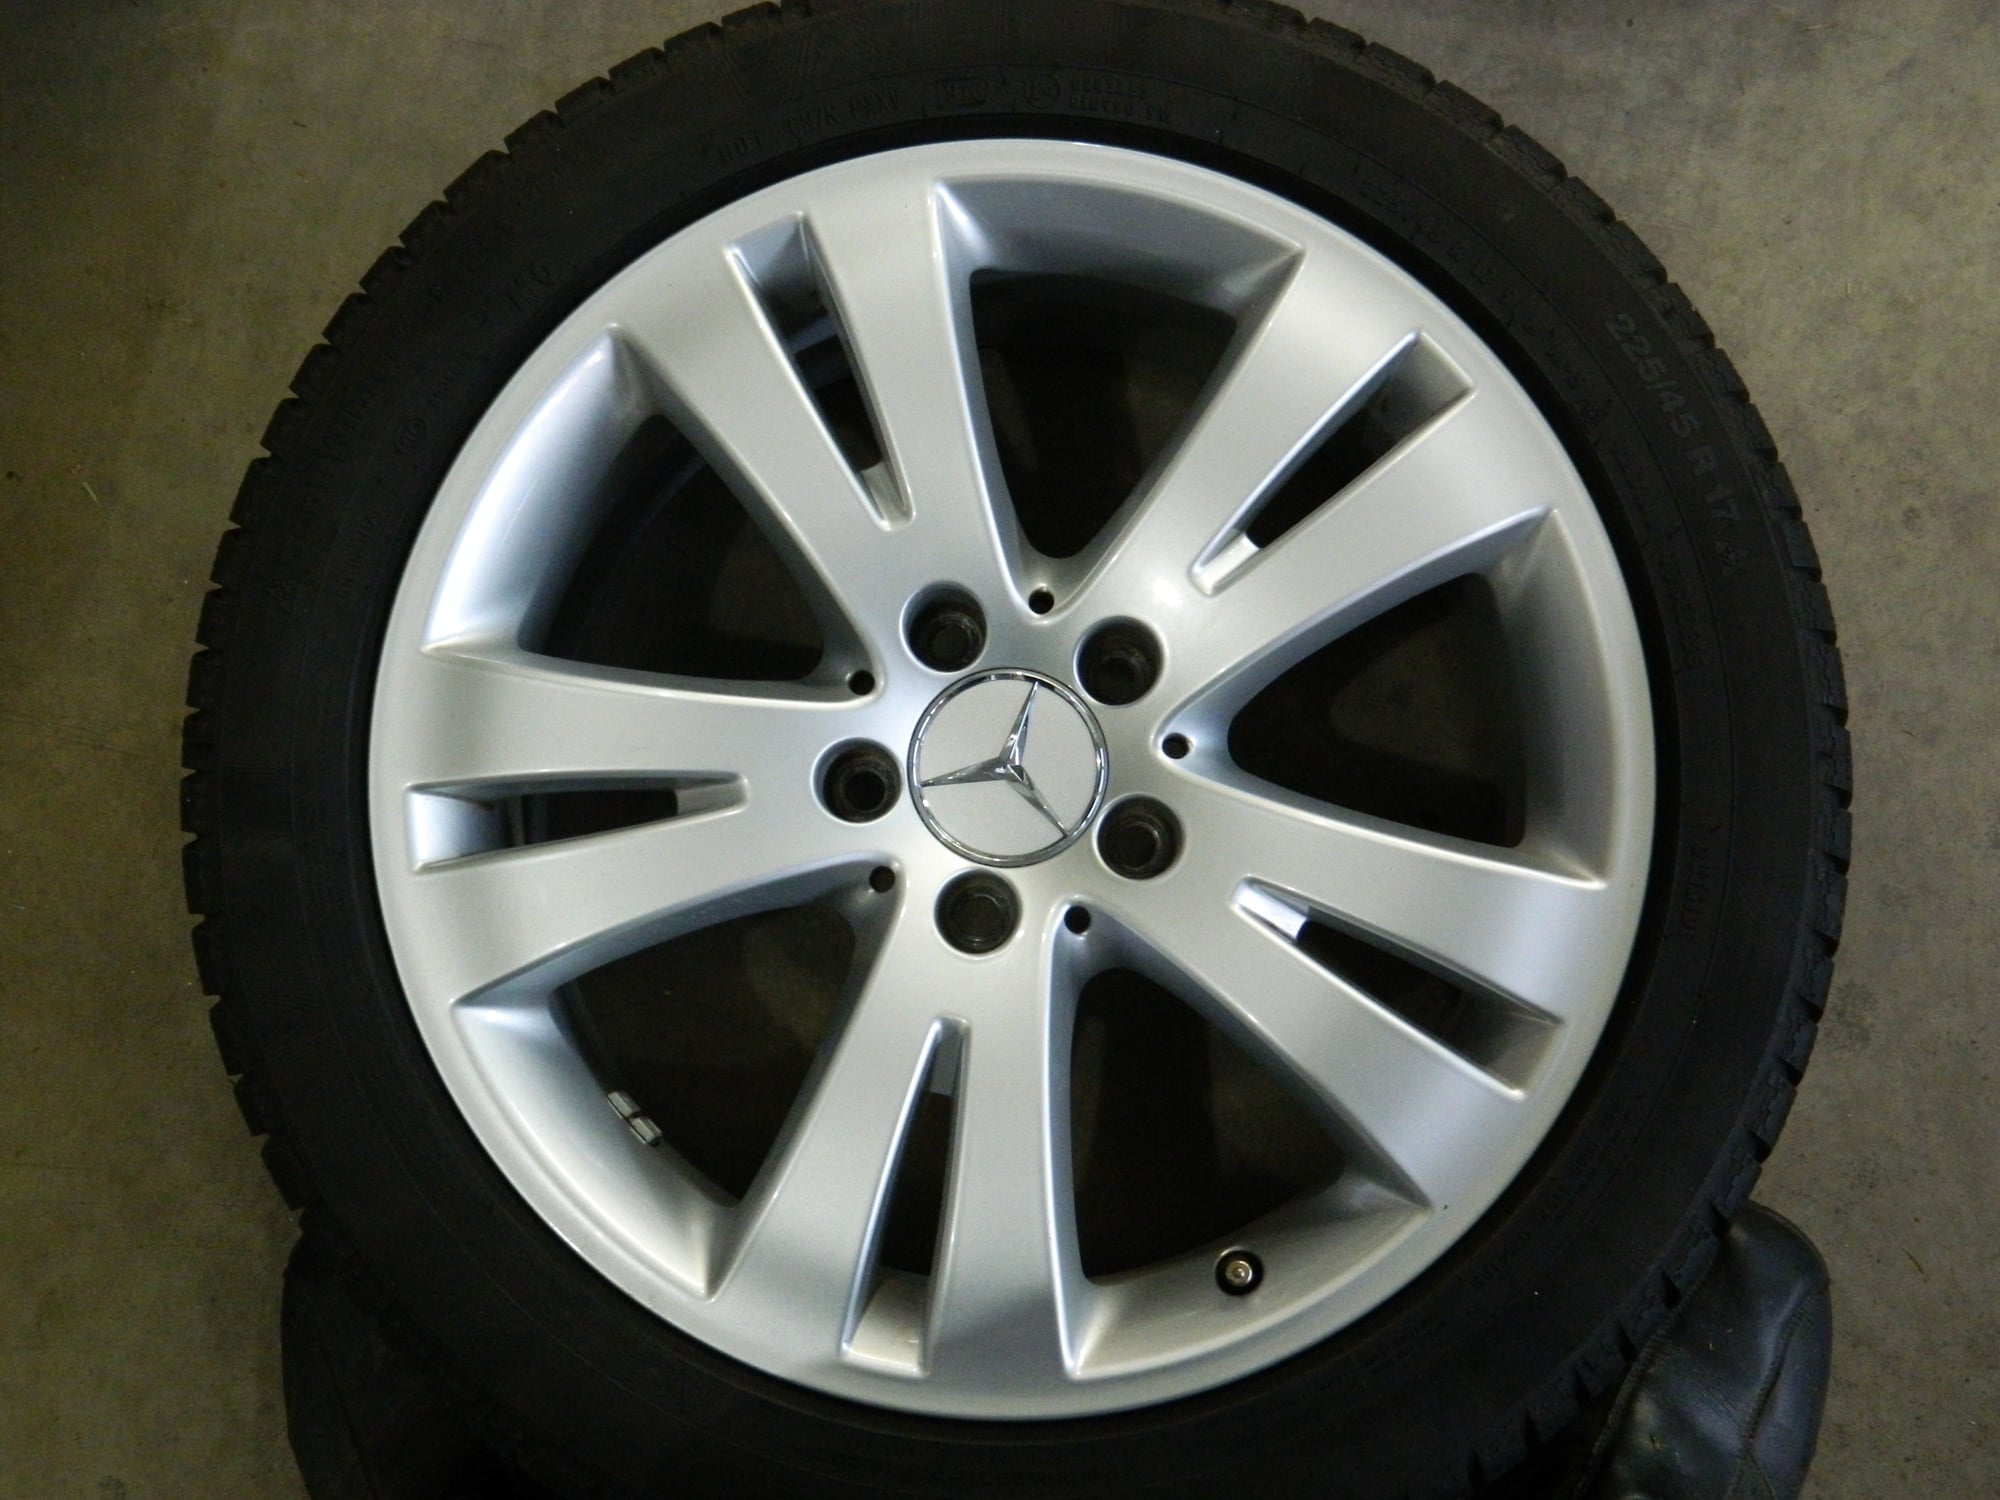 Wheels and Tires/Axles - Mercedes C300 OEM rims and winter tires set of 4 - Used - 2014 Mercedes-Benz C300 - Chilliwack, BC V2R1L2, Canada